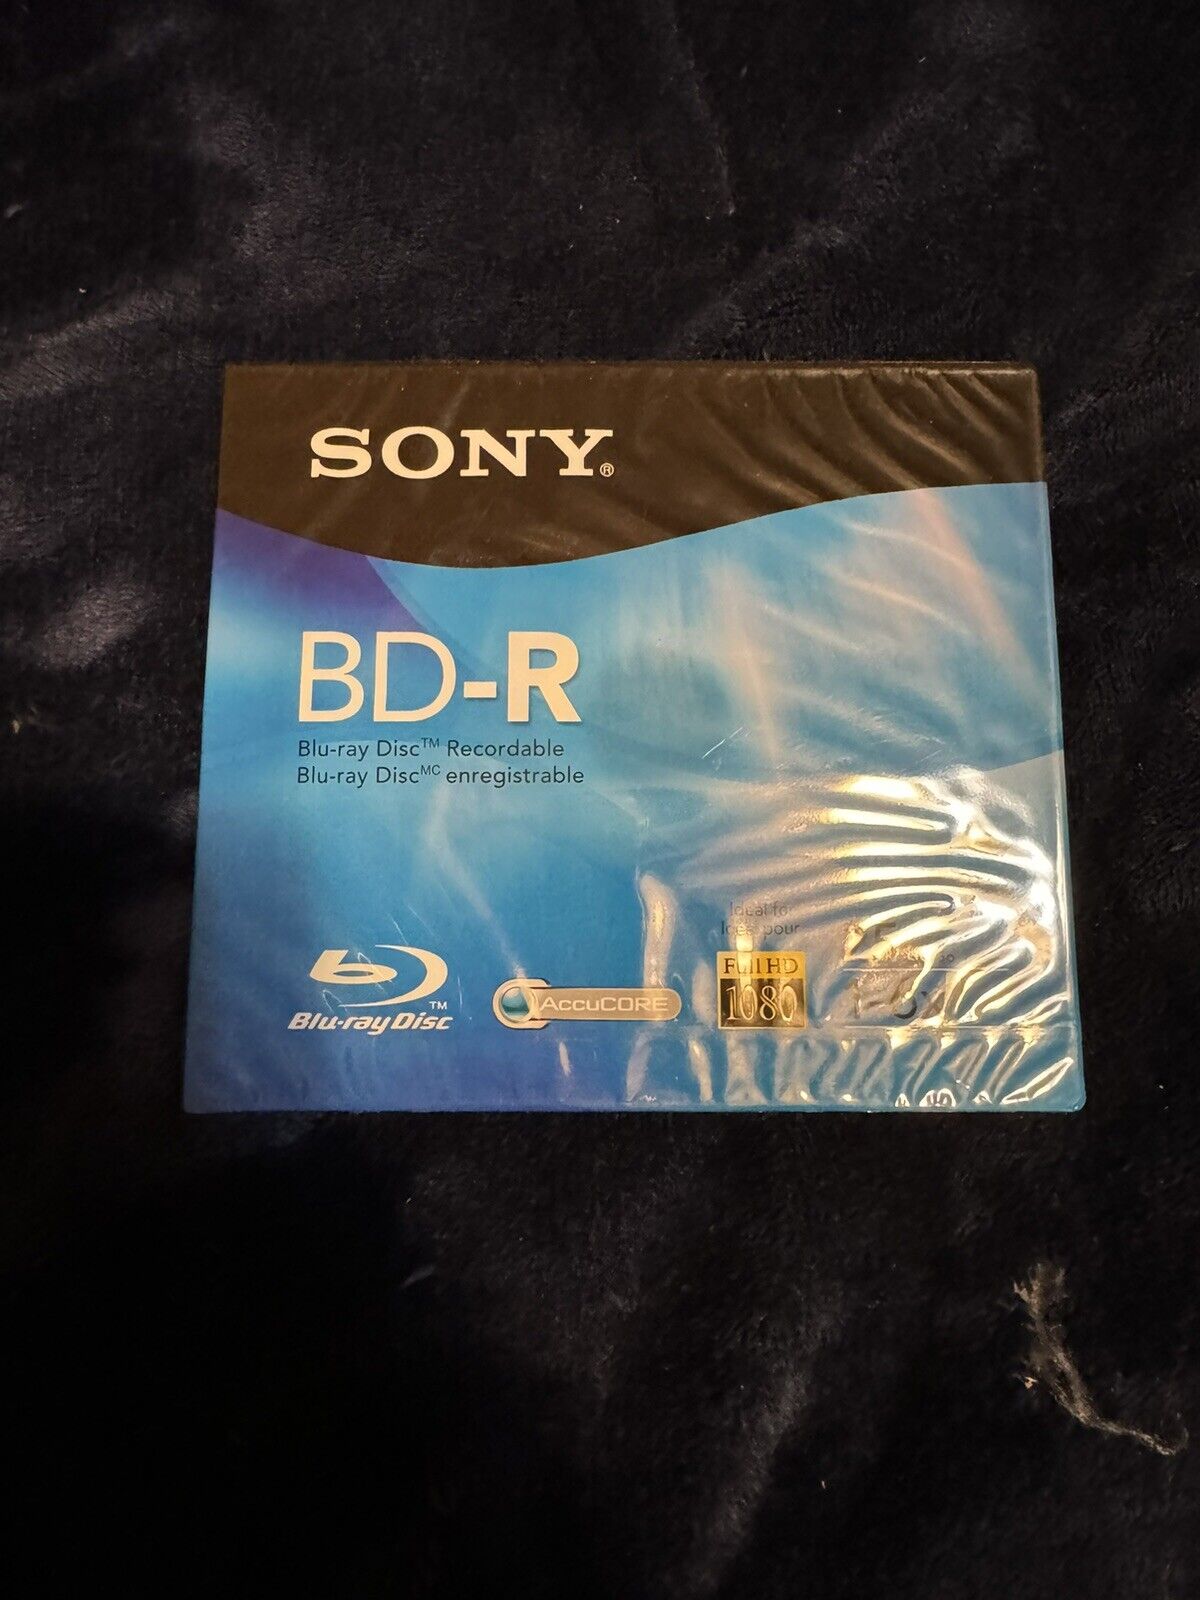 SONY BD-R Blu-ray Disc Recordable - Full HD 1080 25 GB NEW SEALED